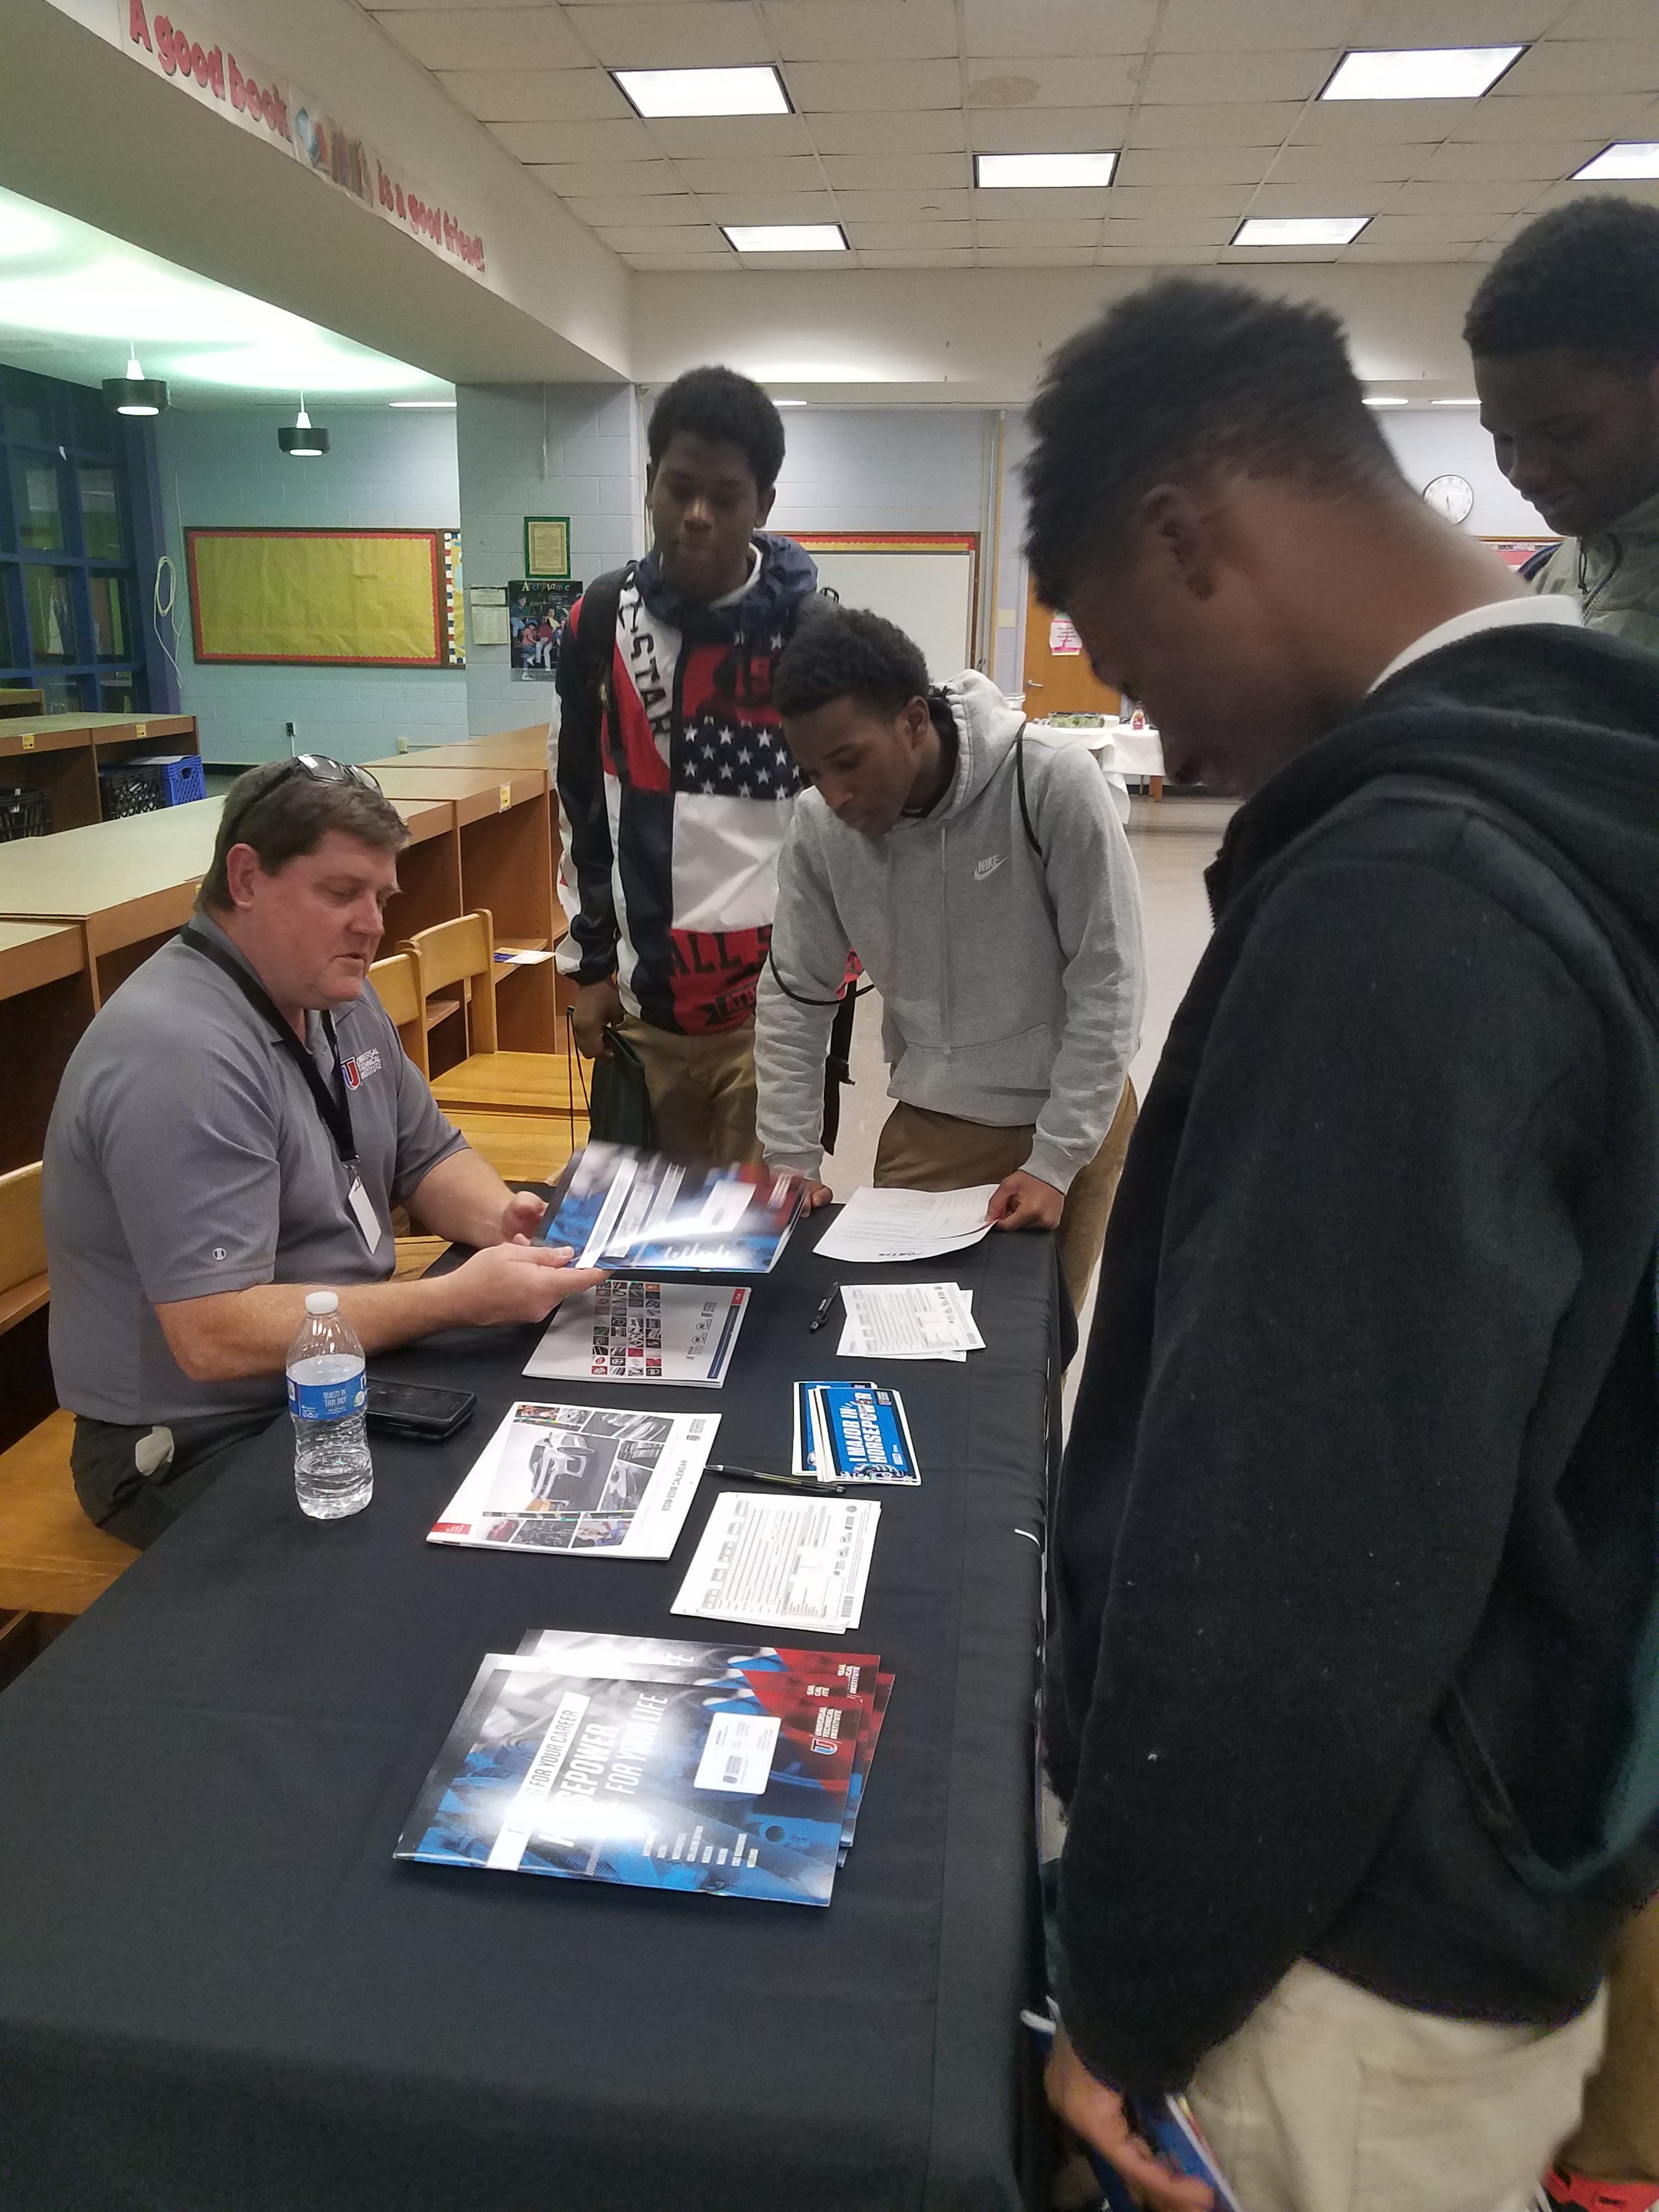 A few BKA students getting information from a career counselor.